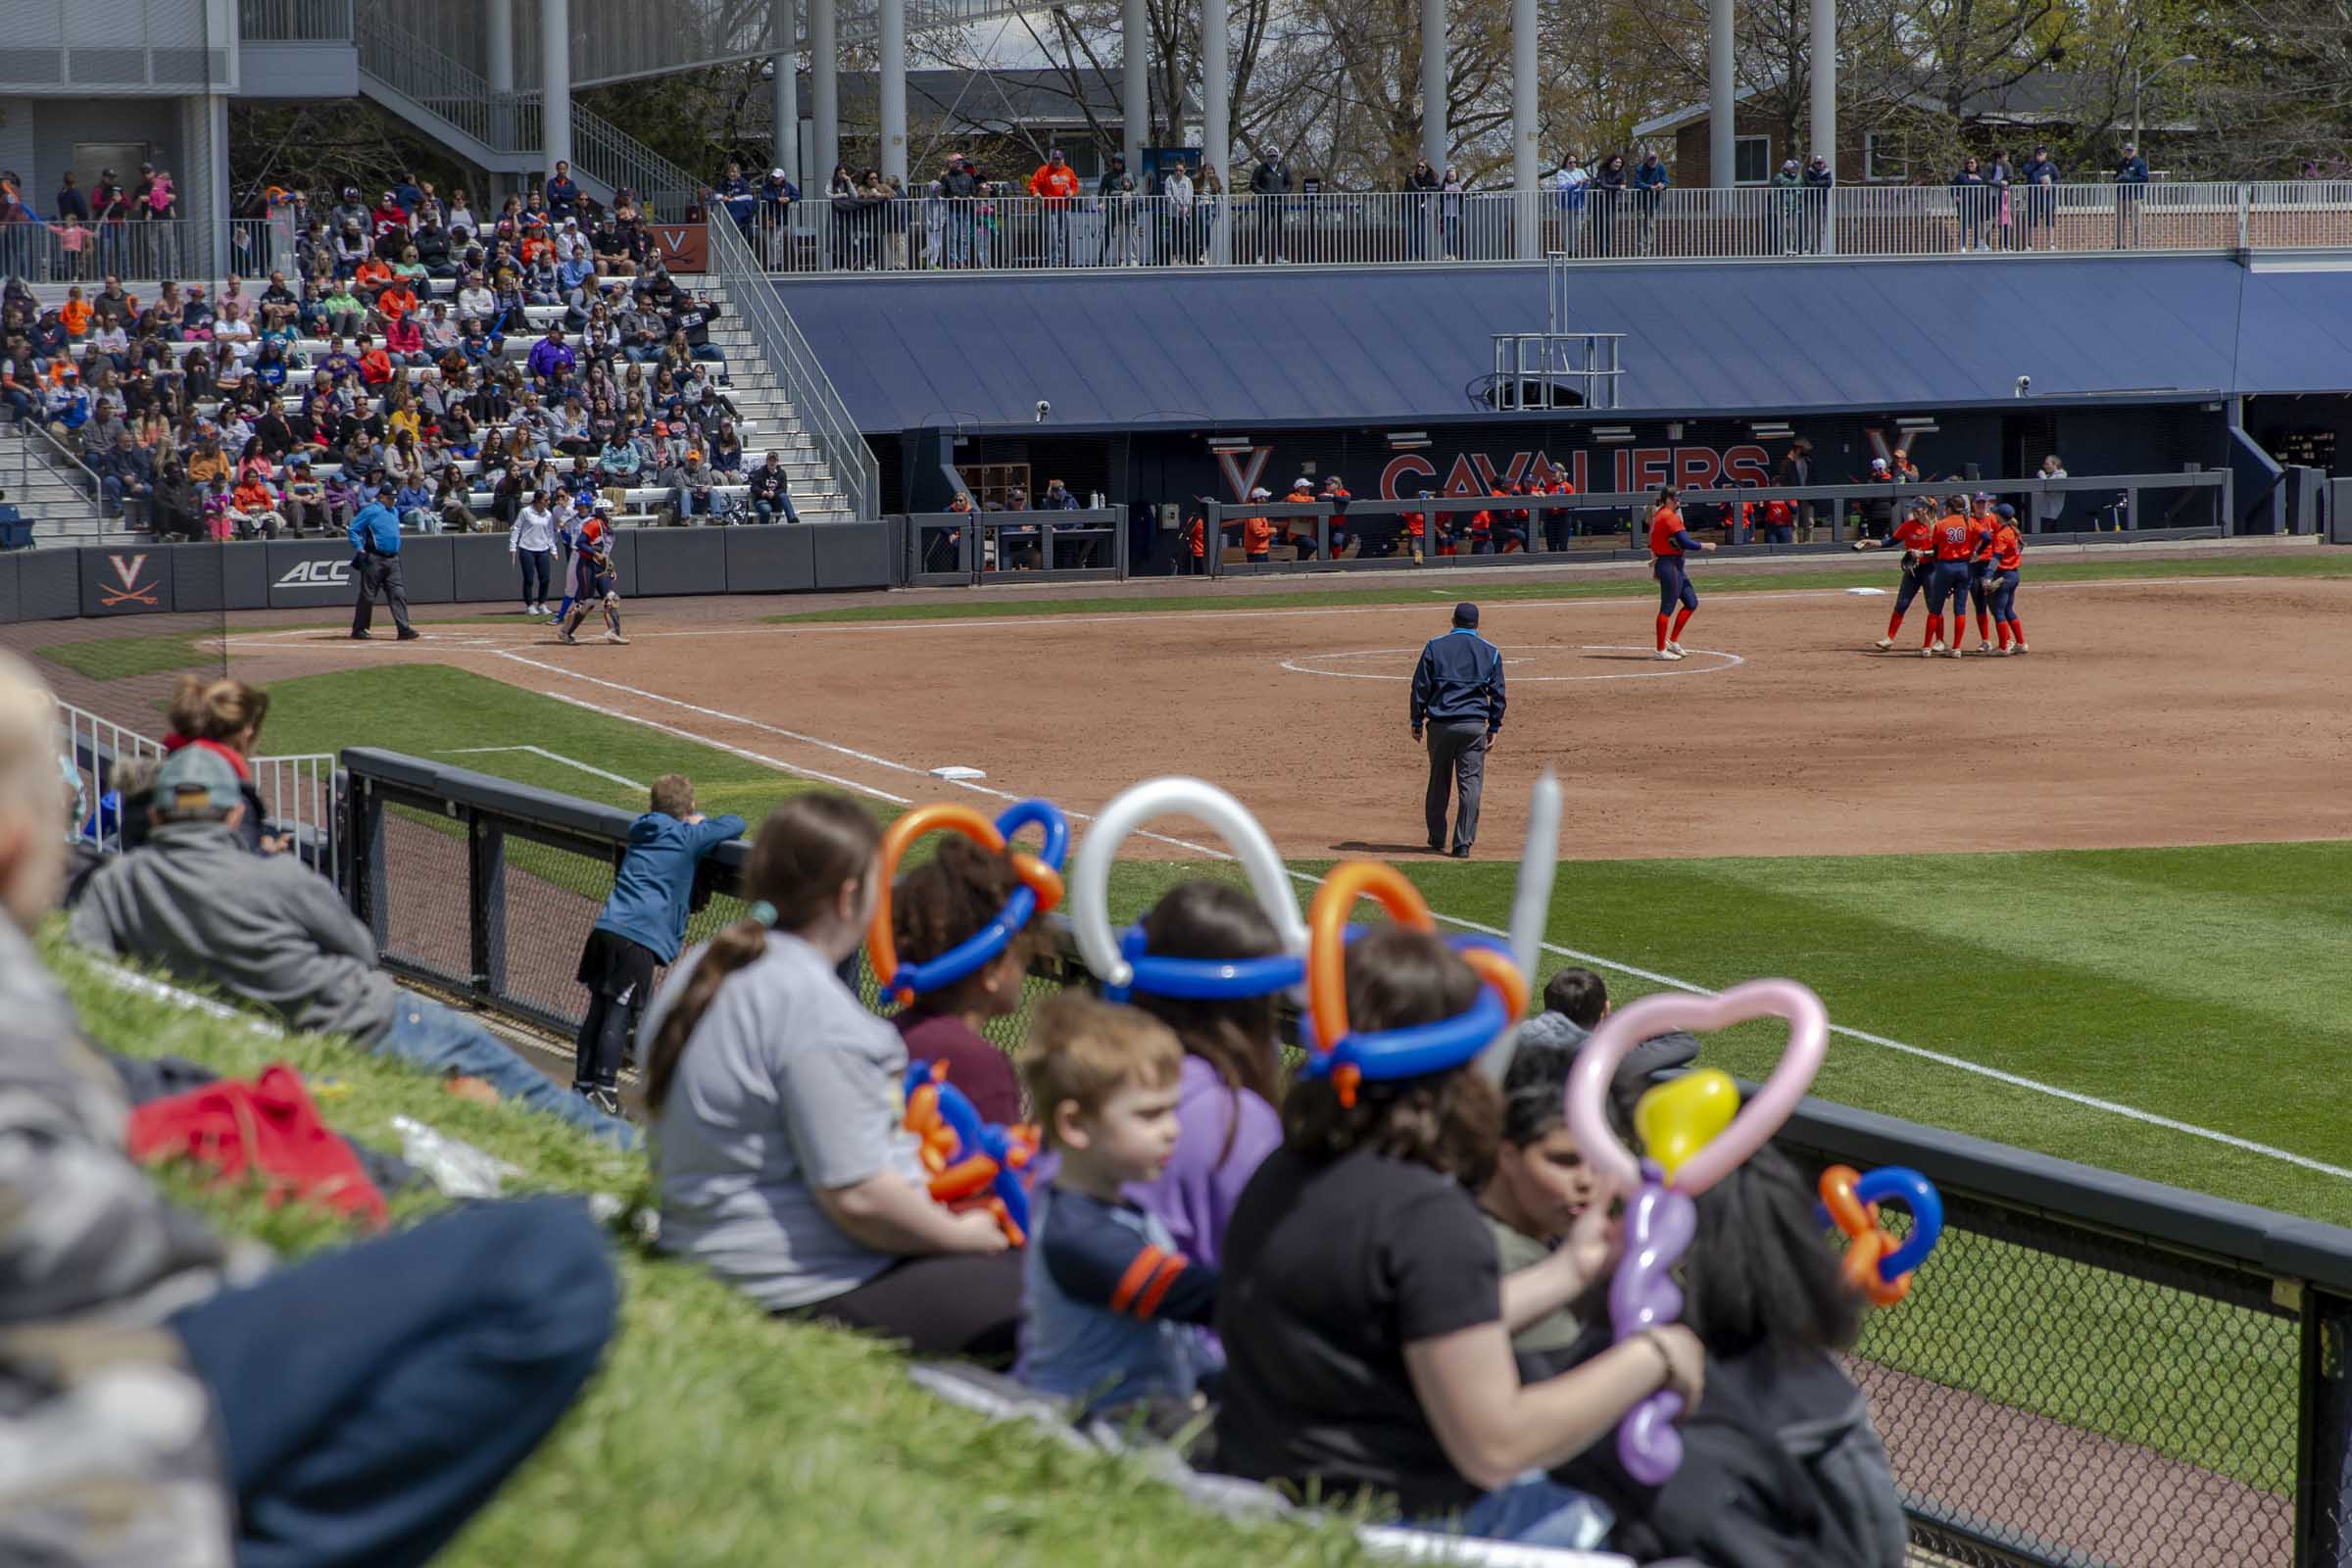 A group of children in balloon hats sit on a grassy hill, watching the softball game.